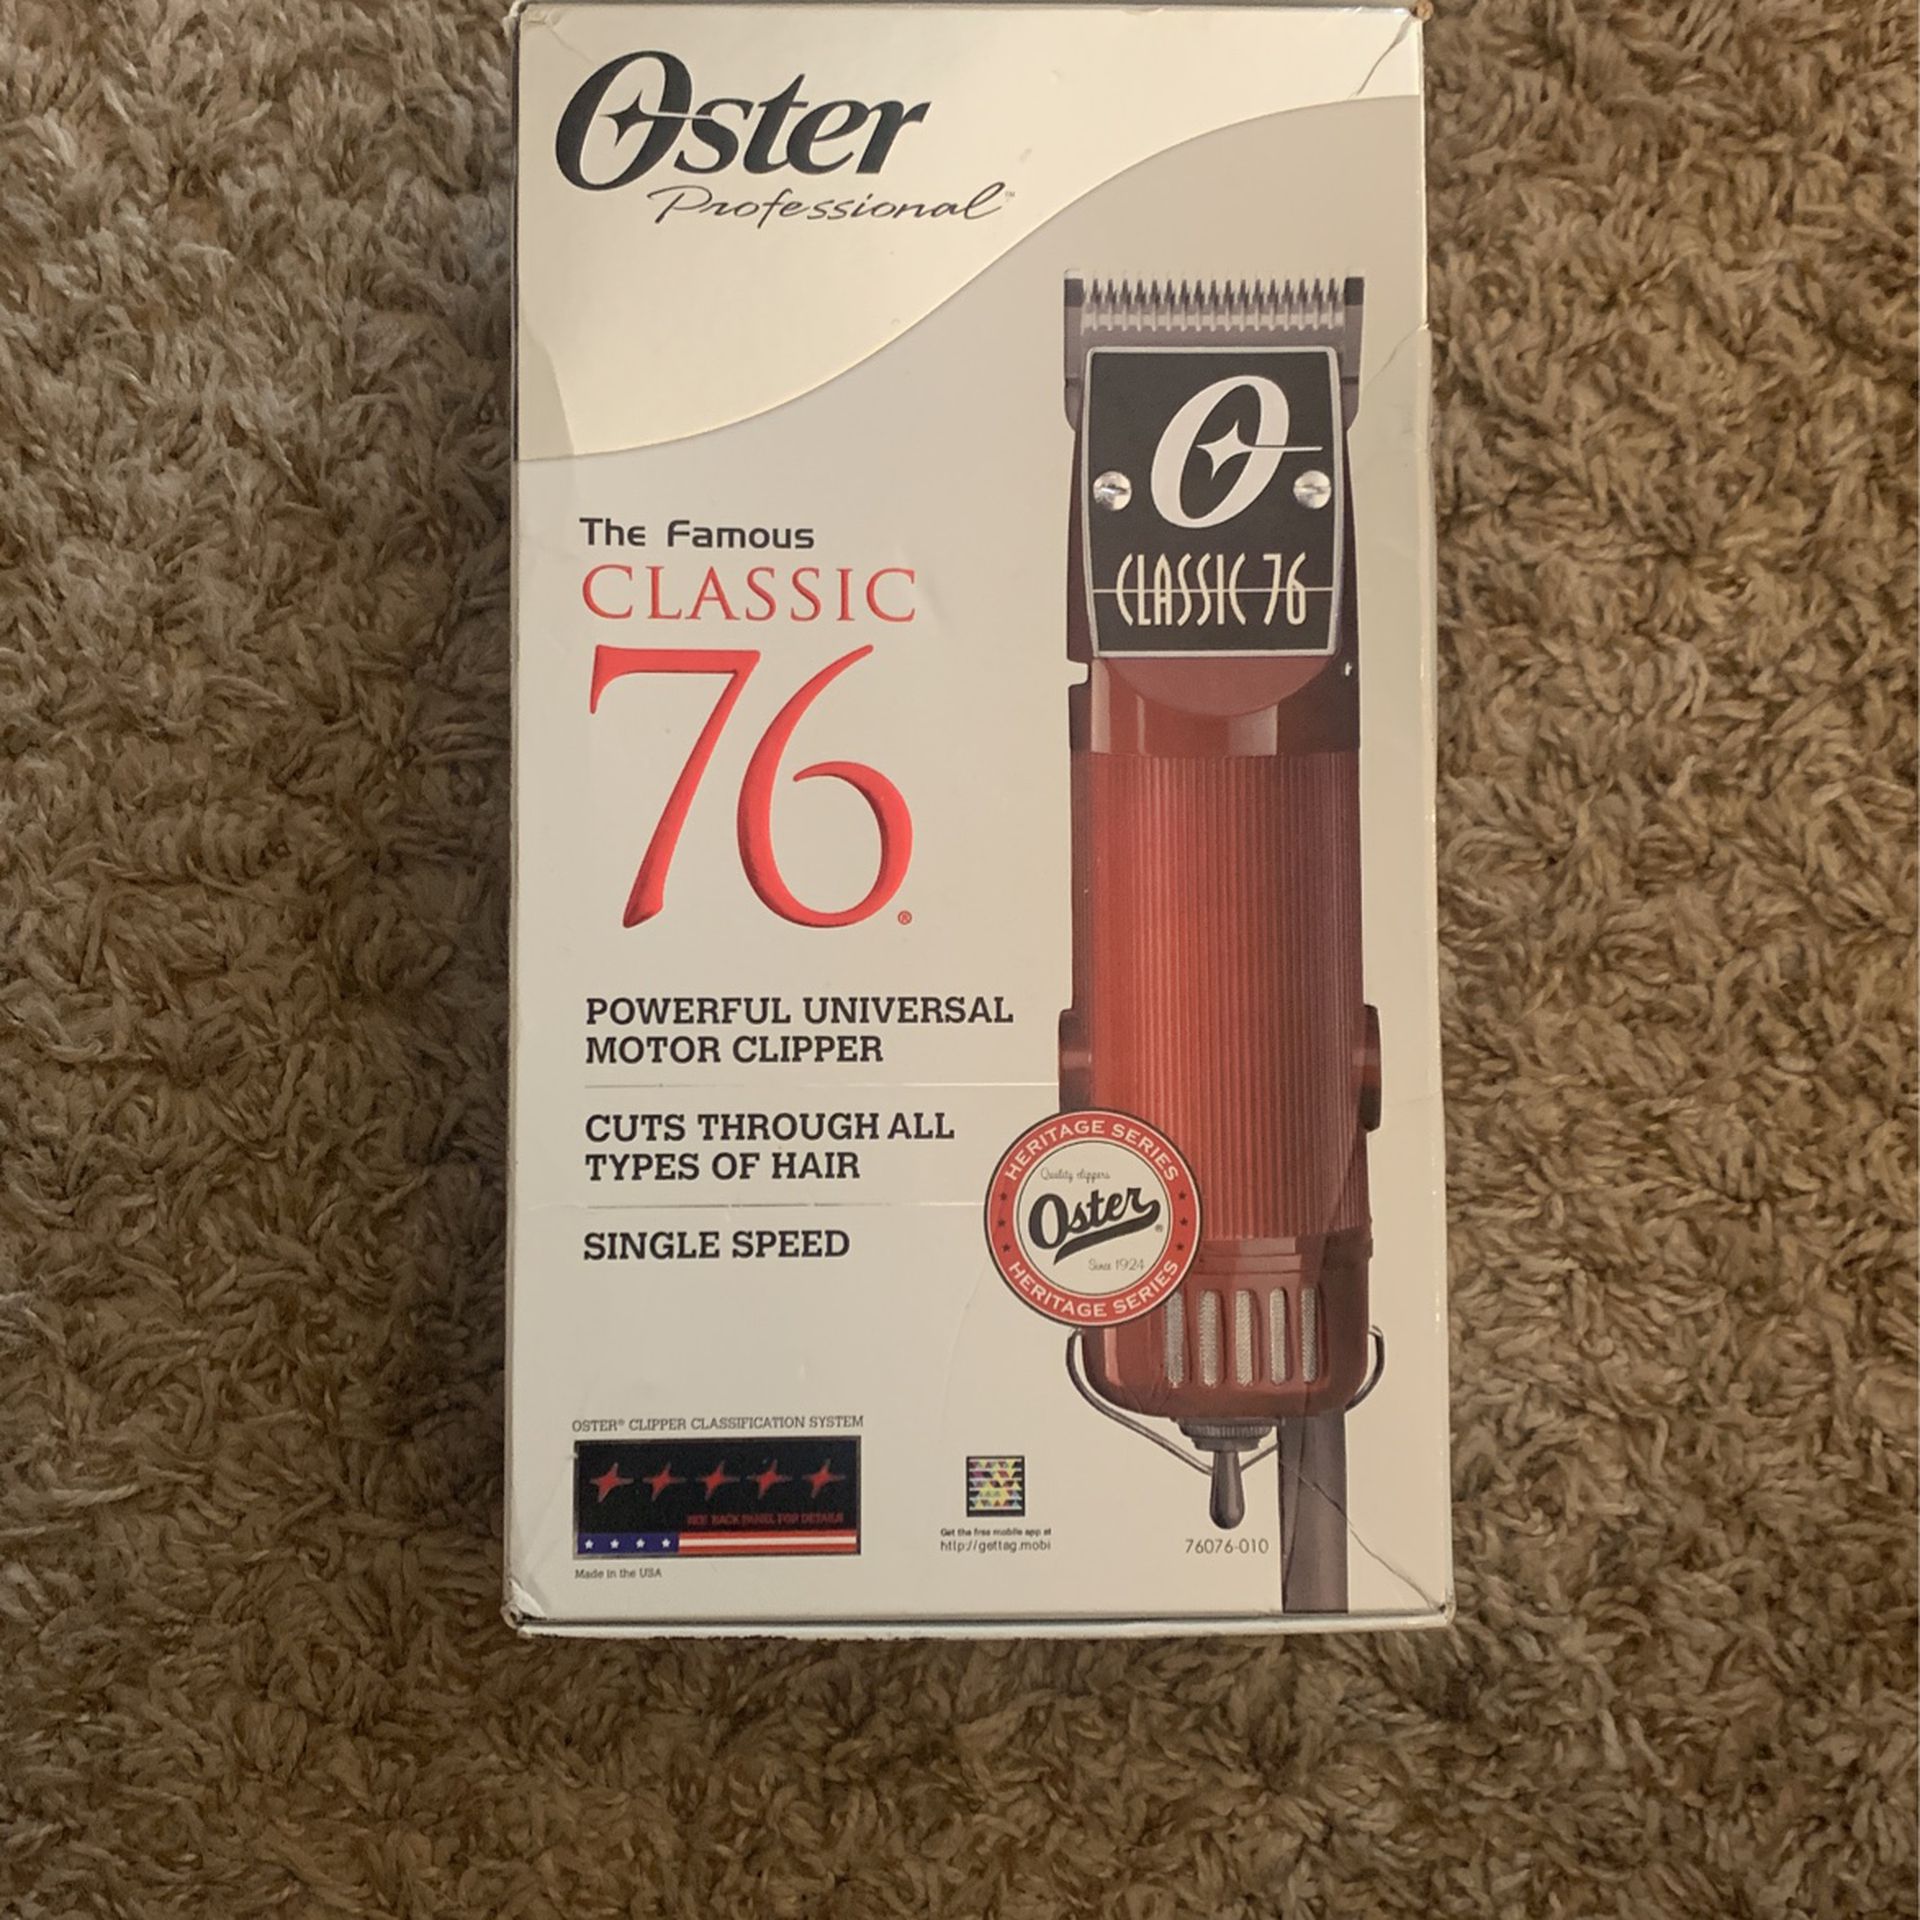 Classic 76 Professional Clippers